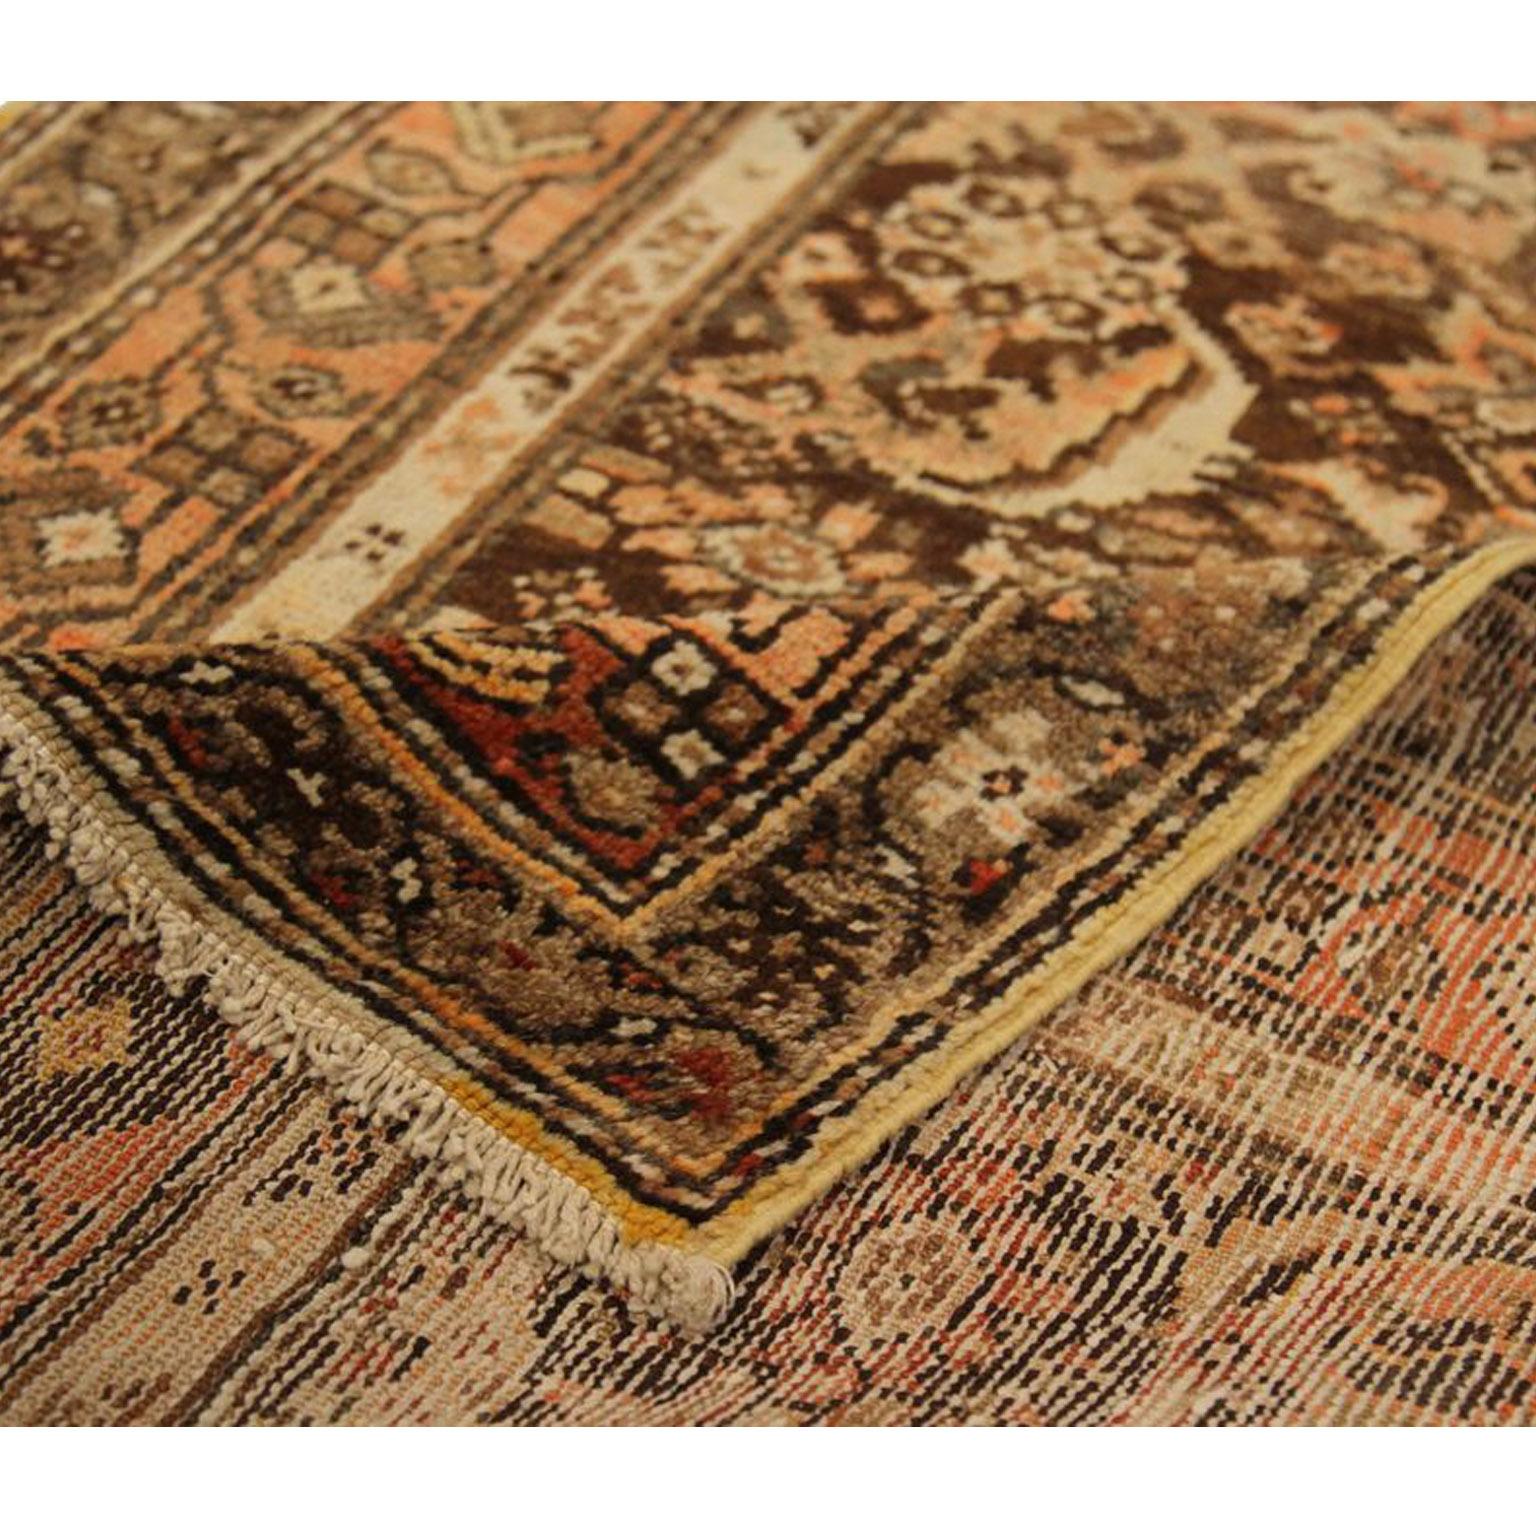 Other Antique Persian Rug Zanjan Style with Full Body Design, circa 1930s For Sale